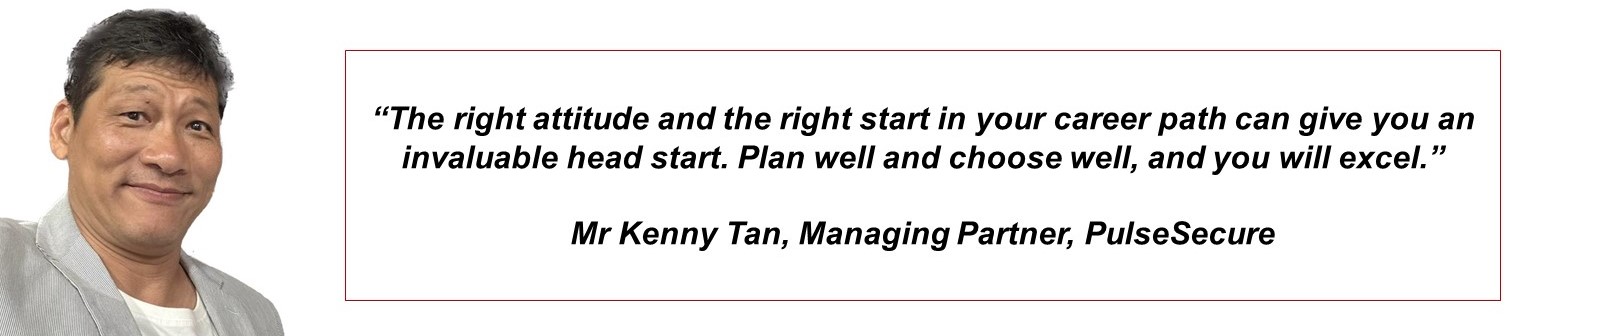 Quote by Mr Kenny Tan, Managing Partner, PulseSecure